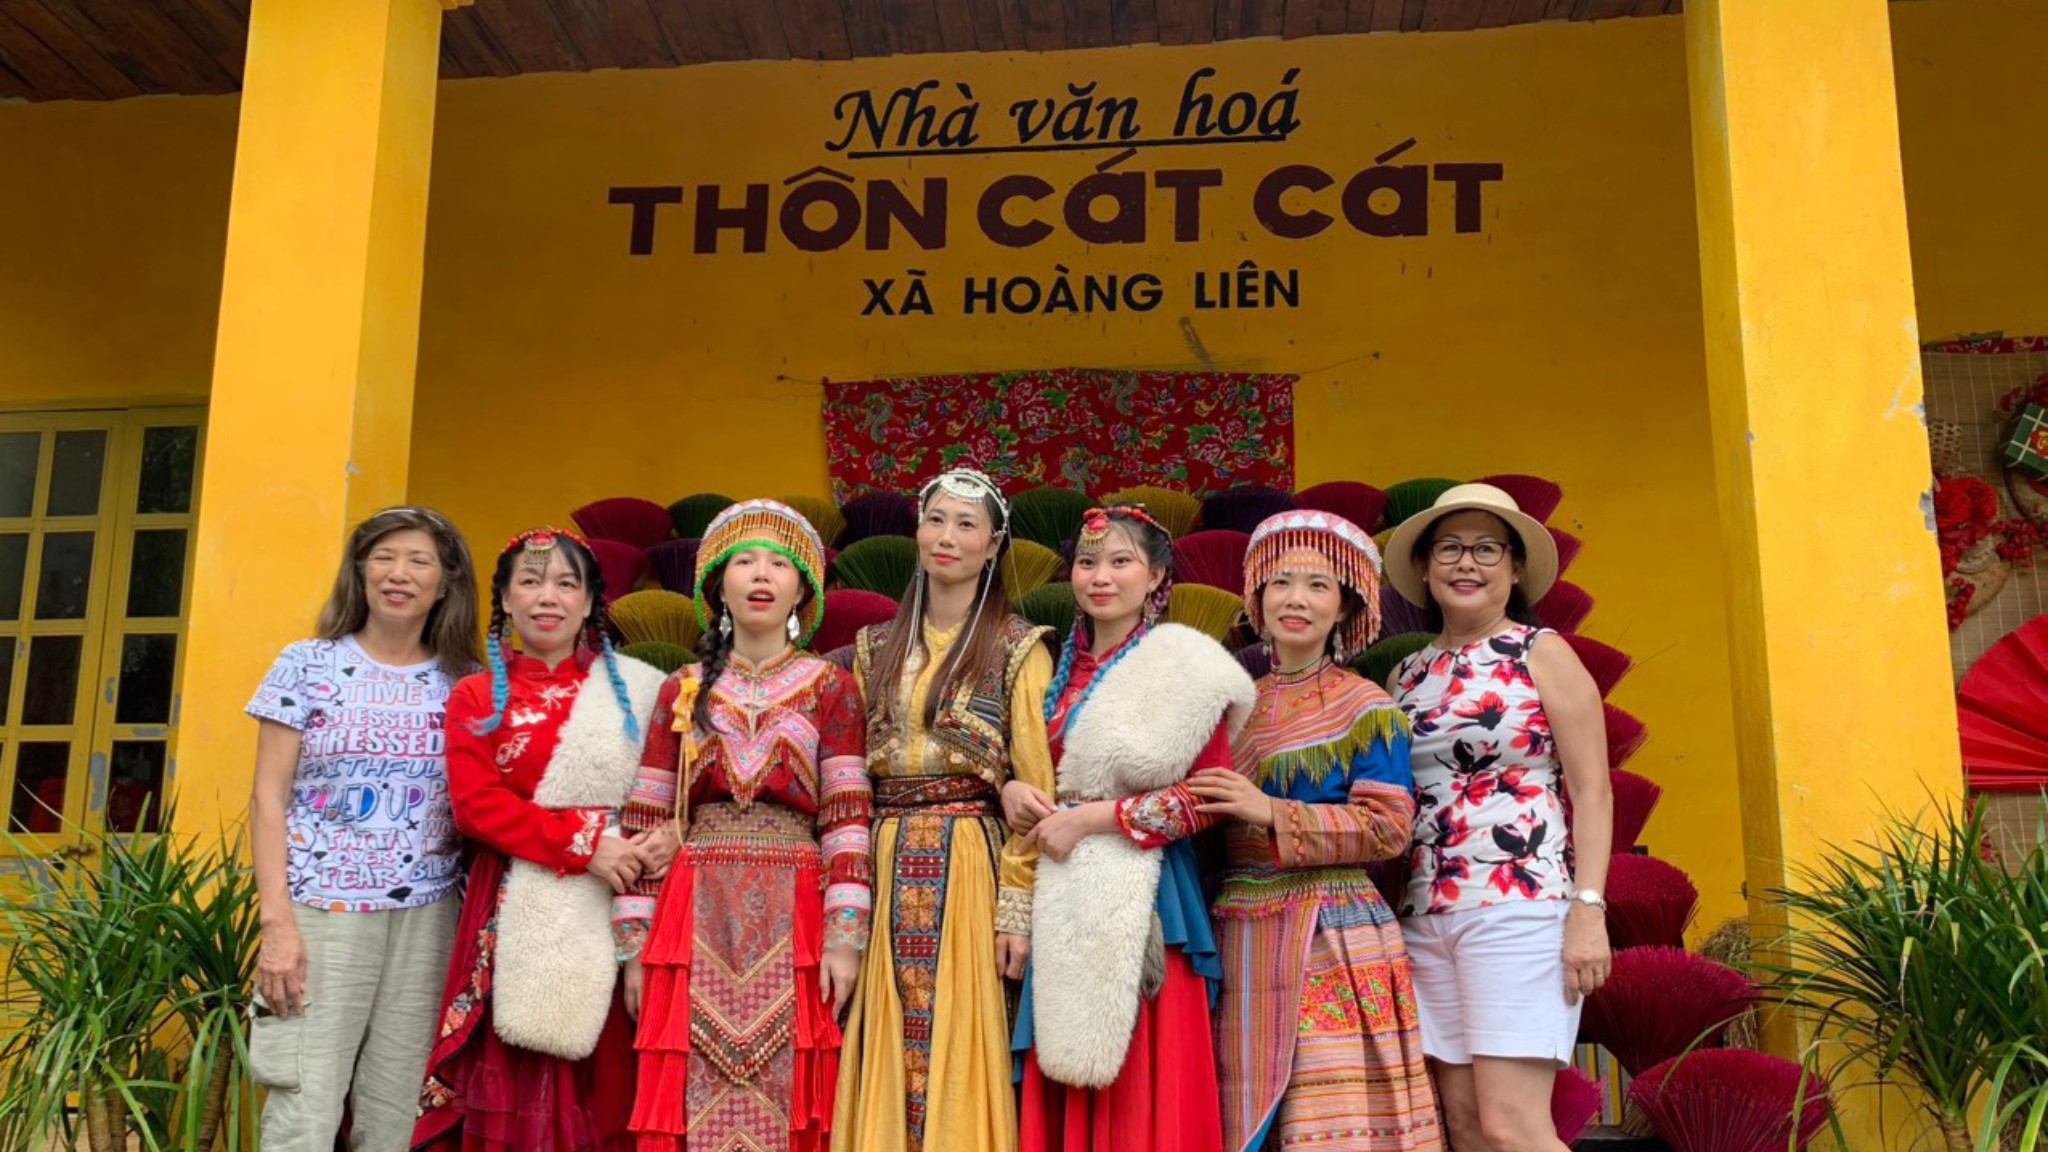 Day 4 Meet Local In Traditional Customs At Cat Cat Village